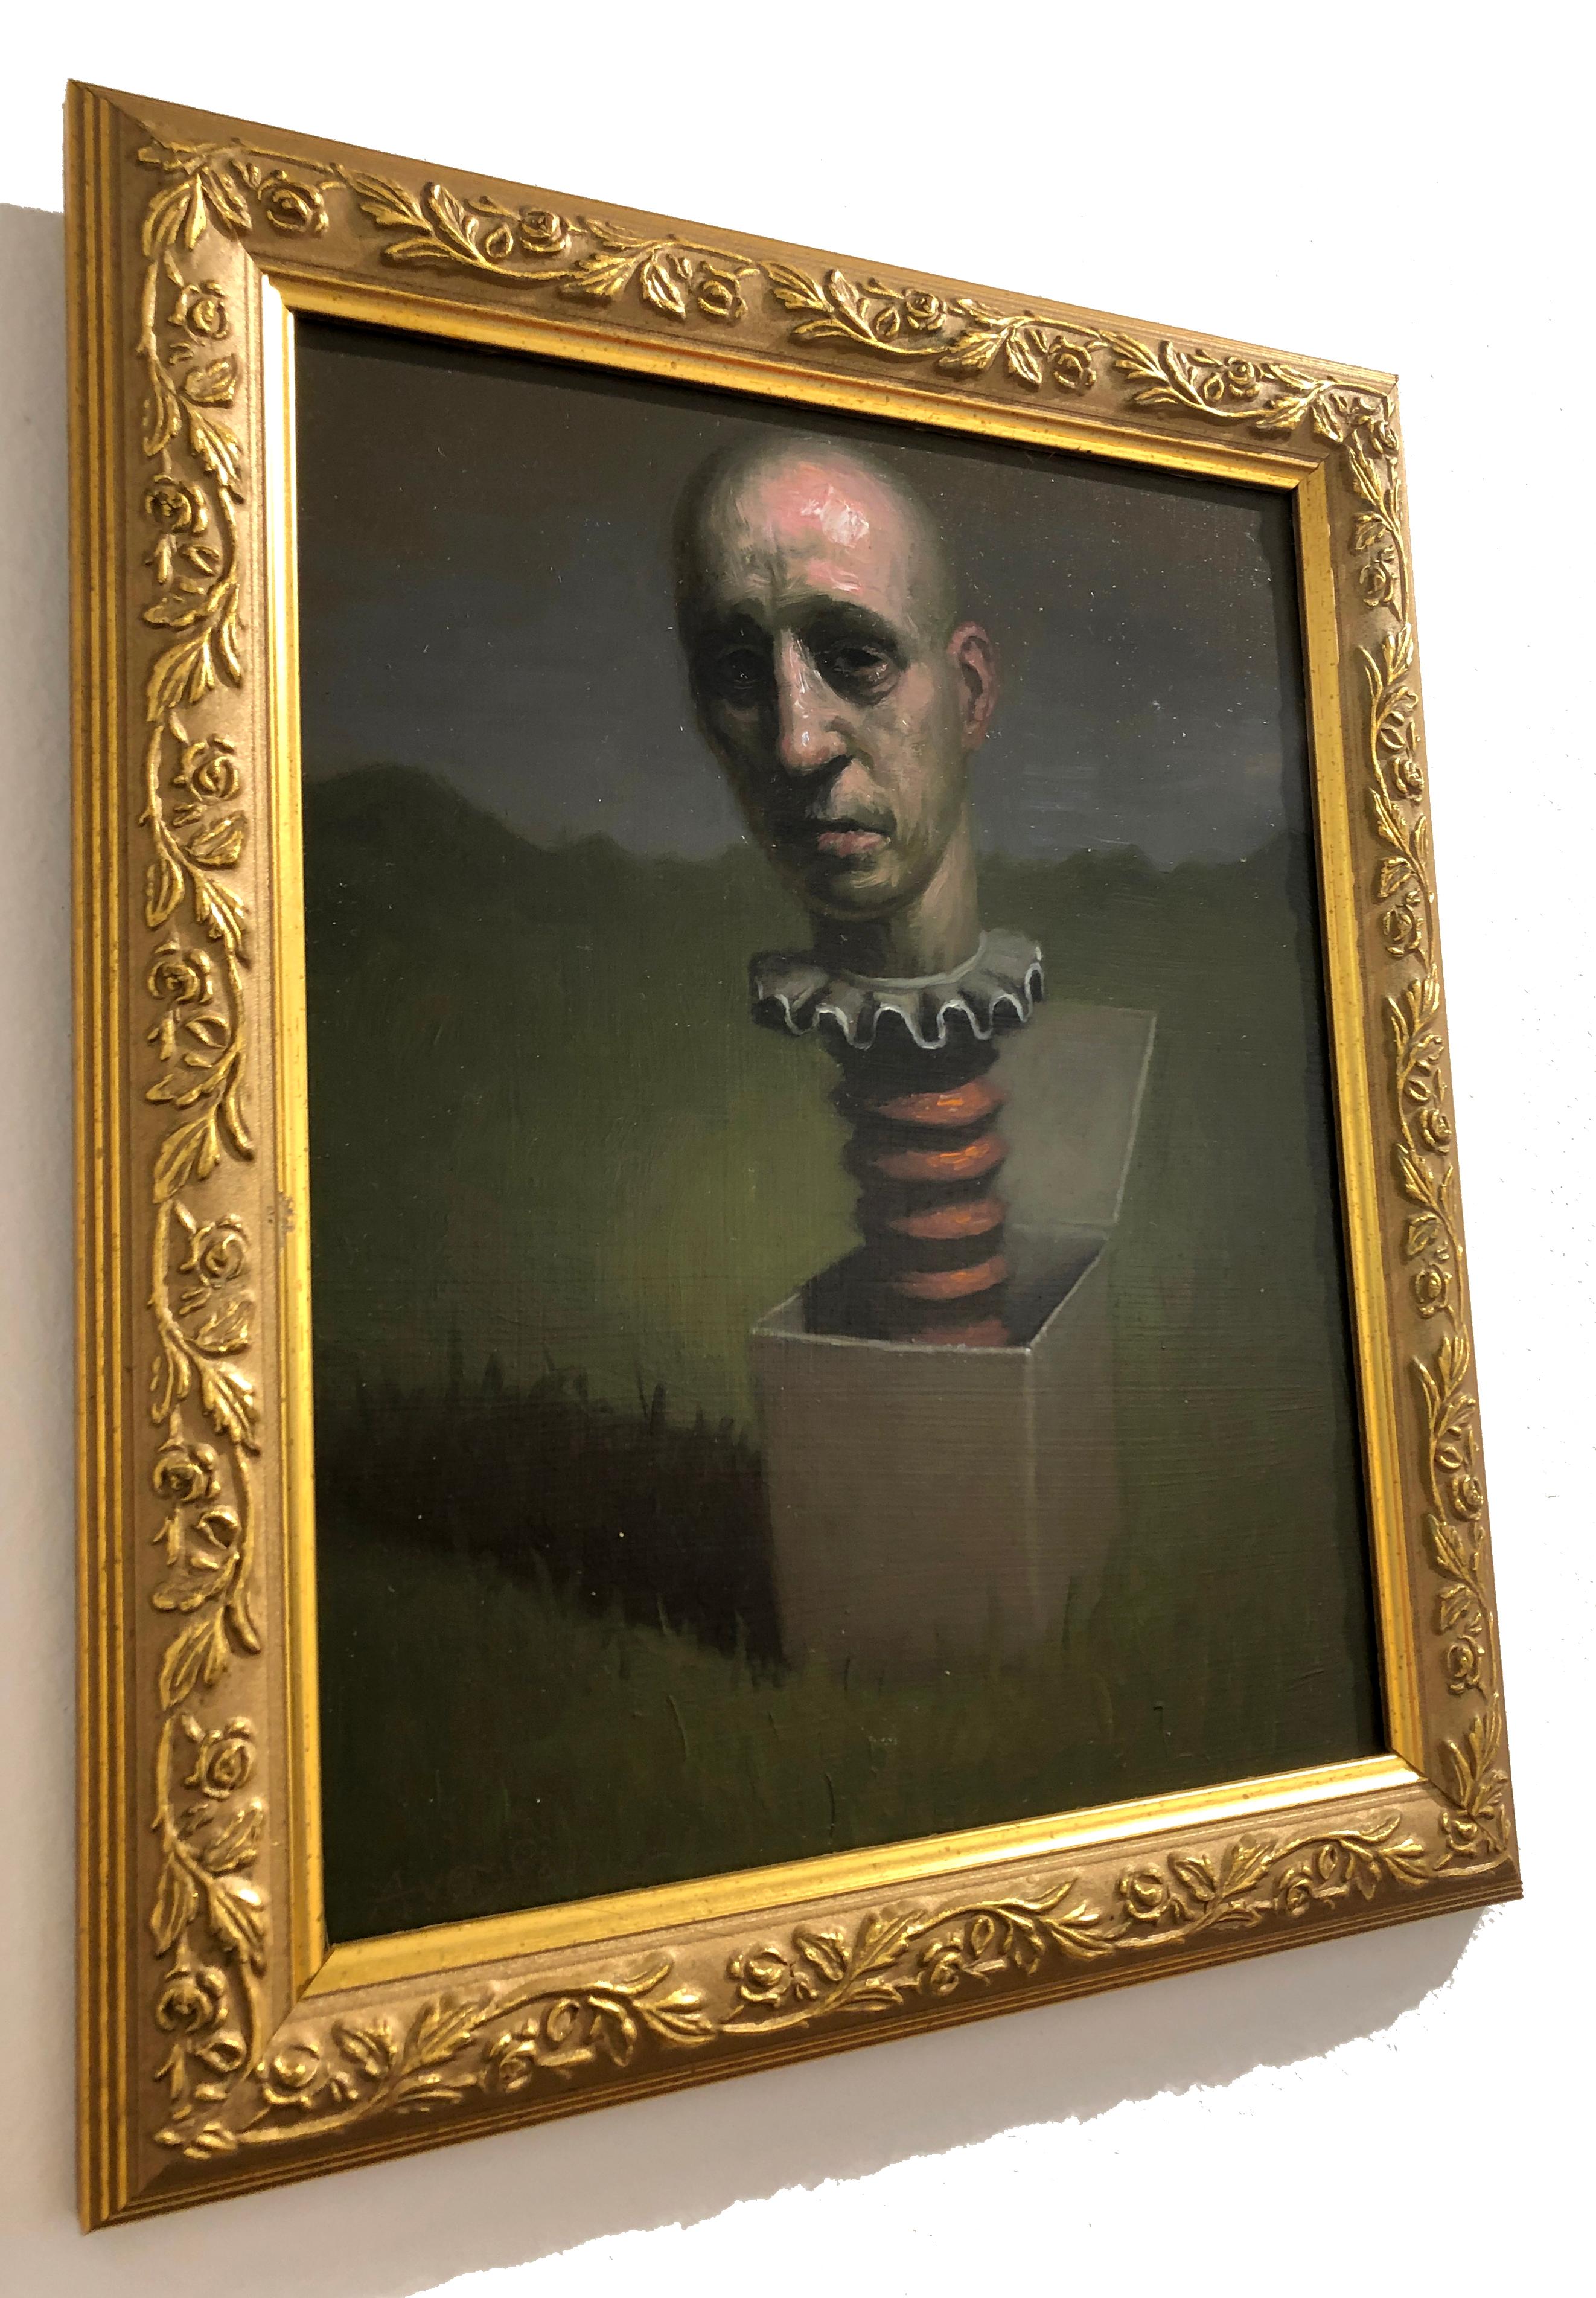 Man Thinking Outside the Box, Avery Palmer, Oil on board, pop surreal figure 2